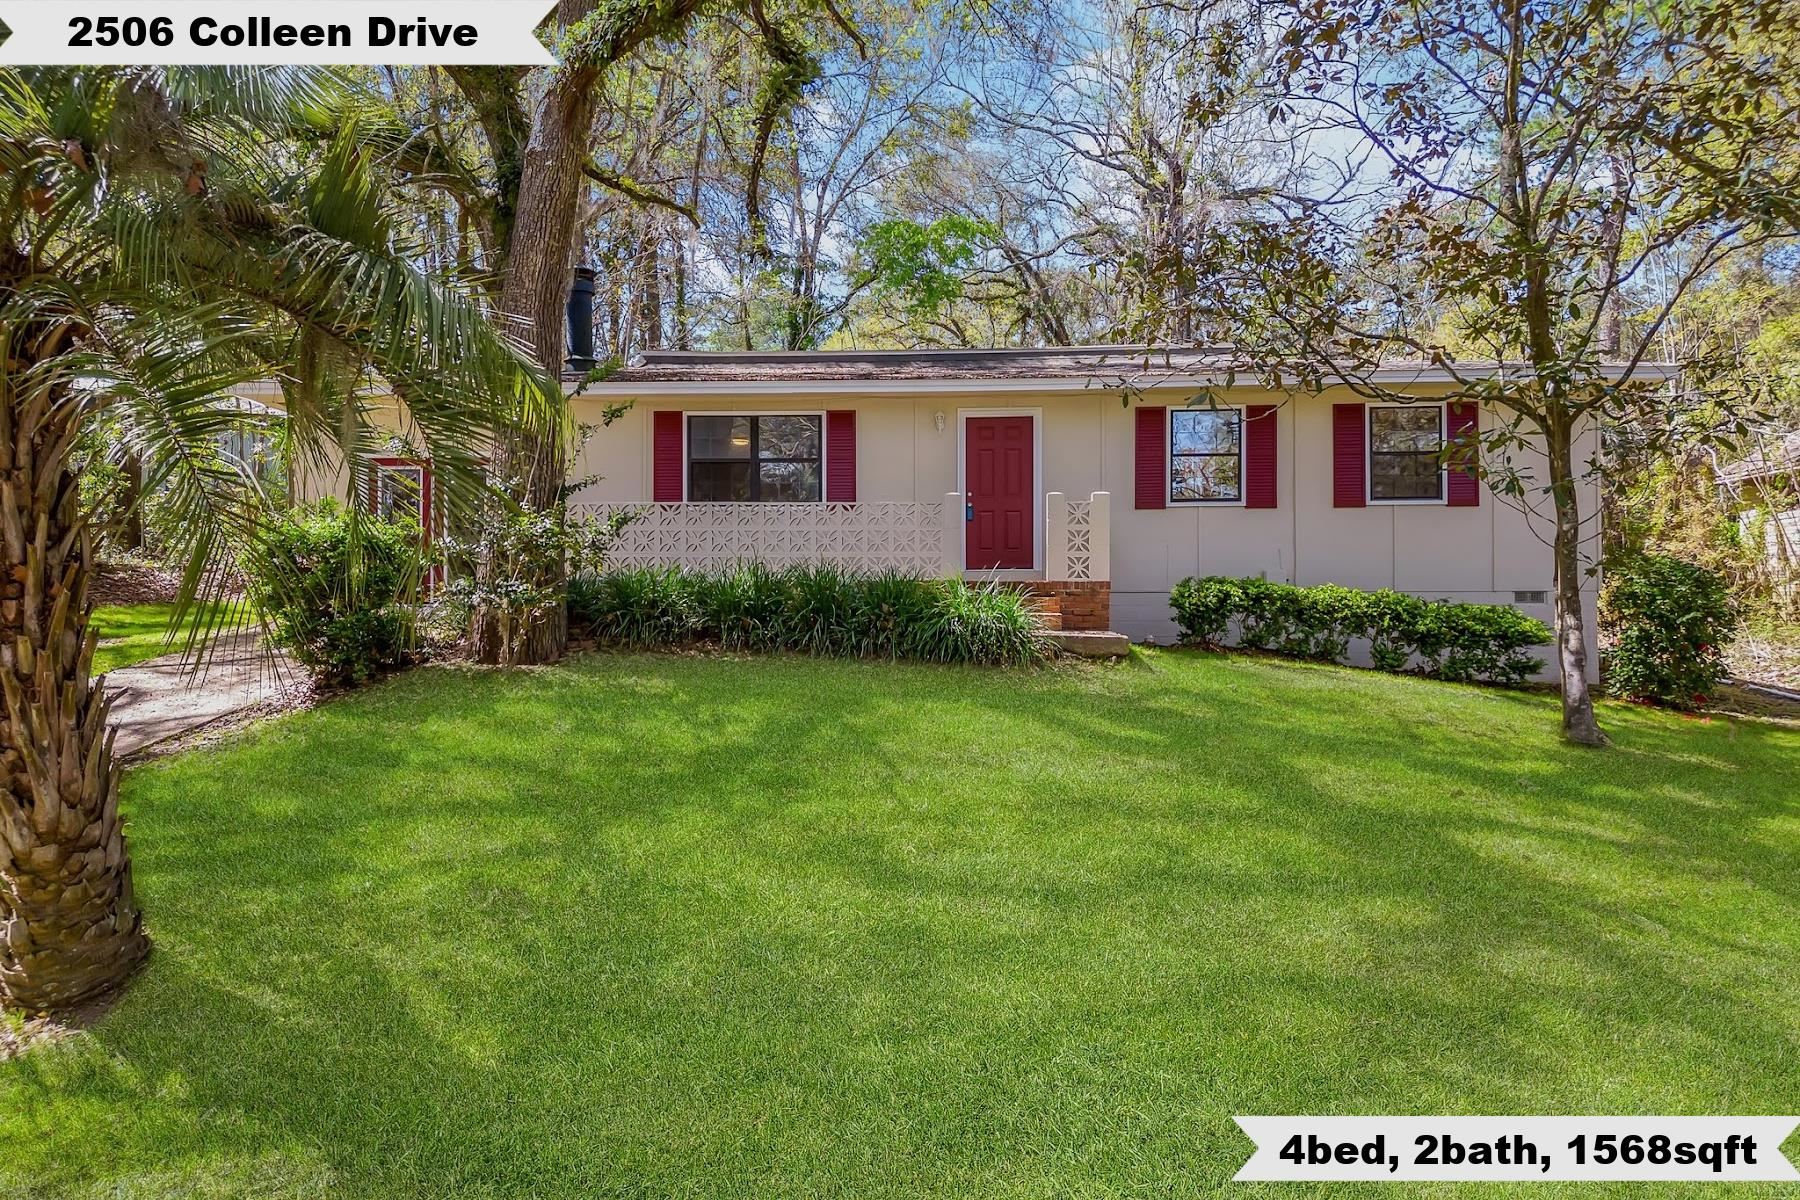 2506 Colleen Drive, TALLAHASSEE, FL 32303